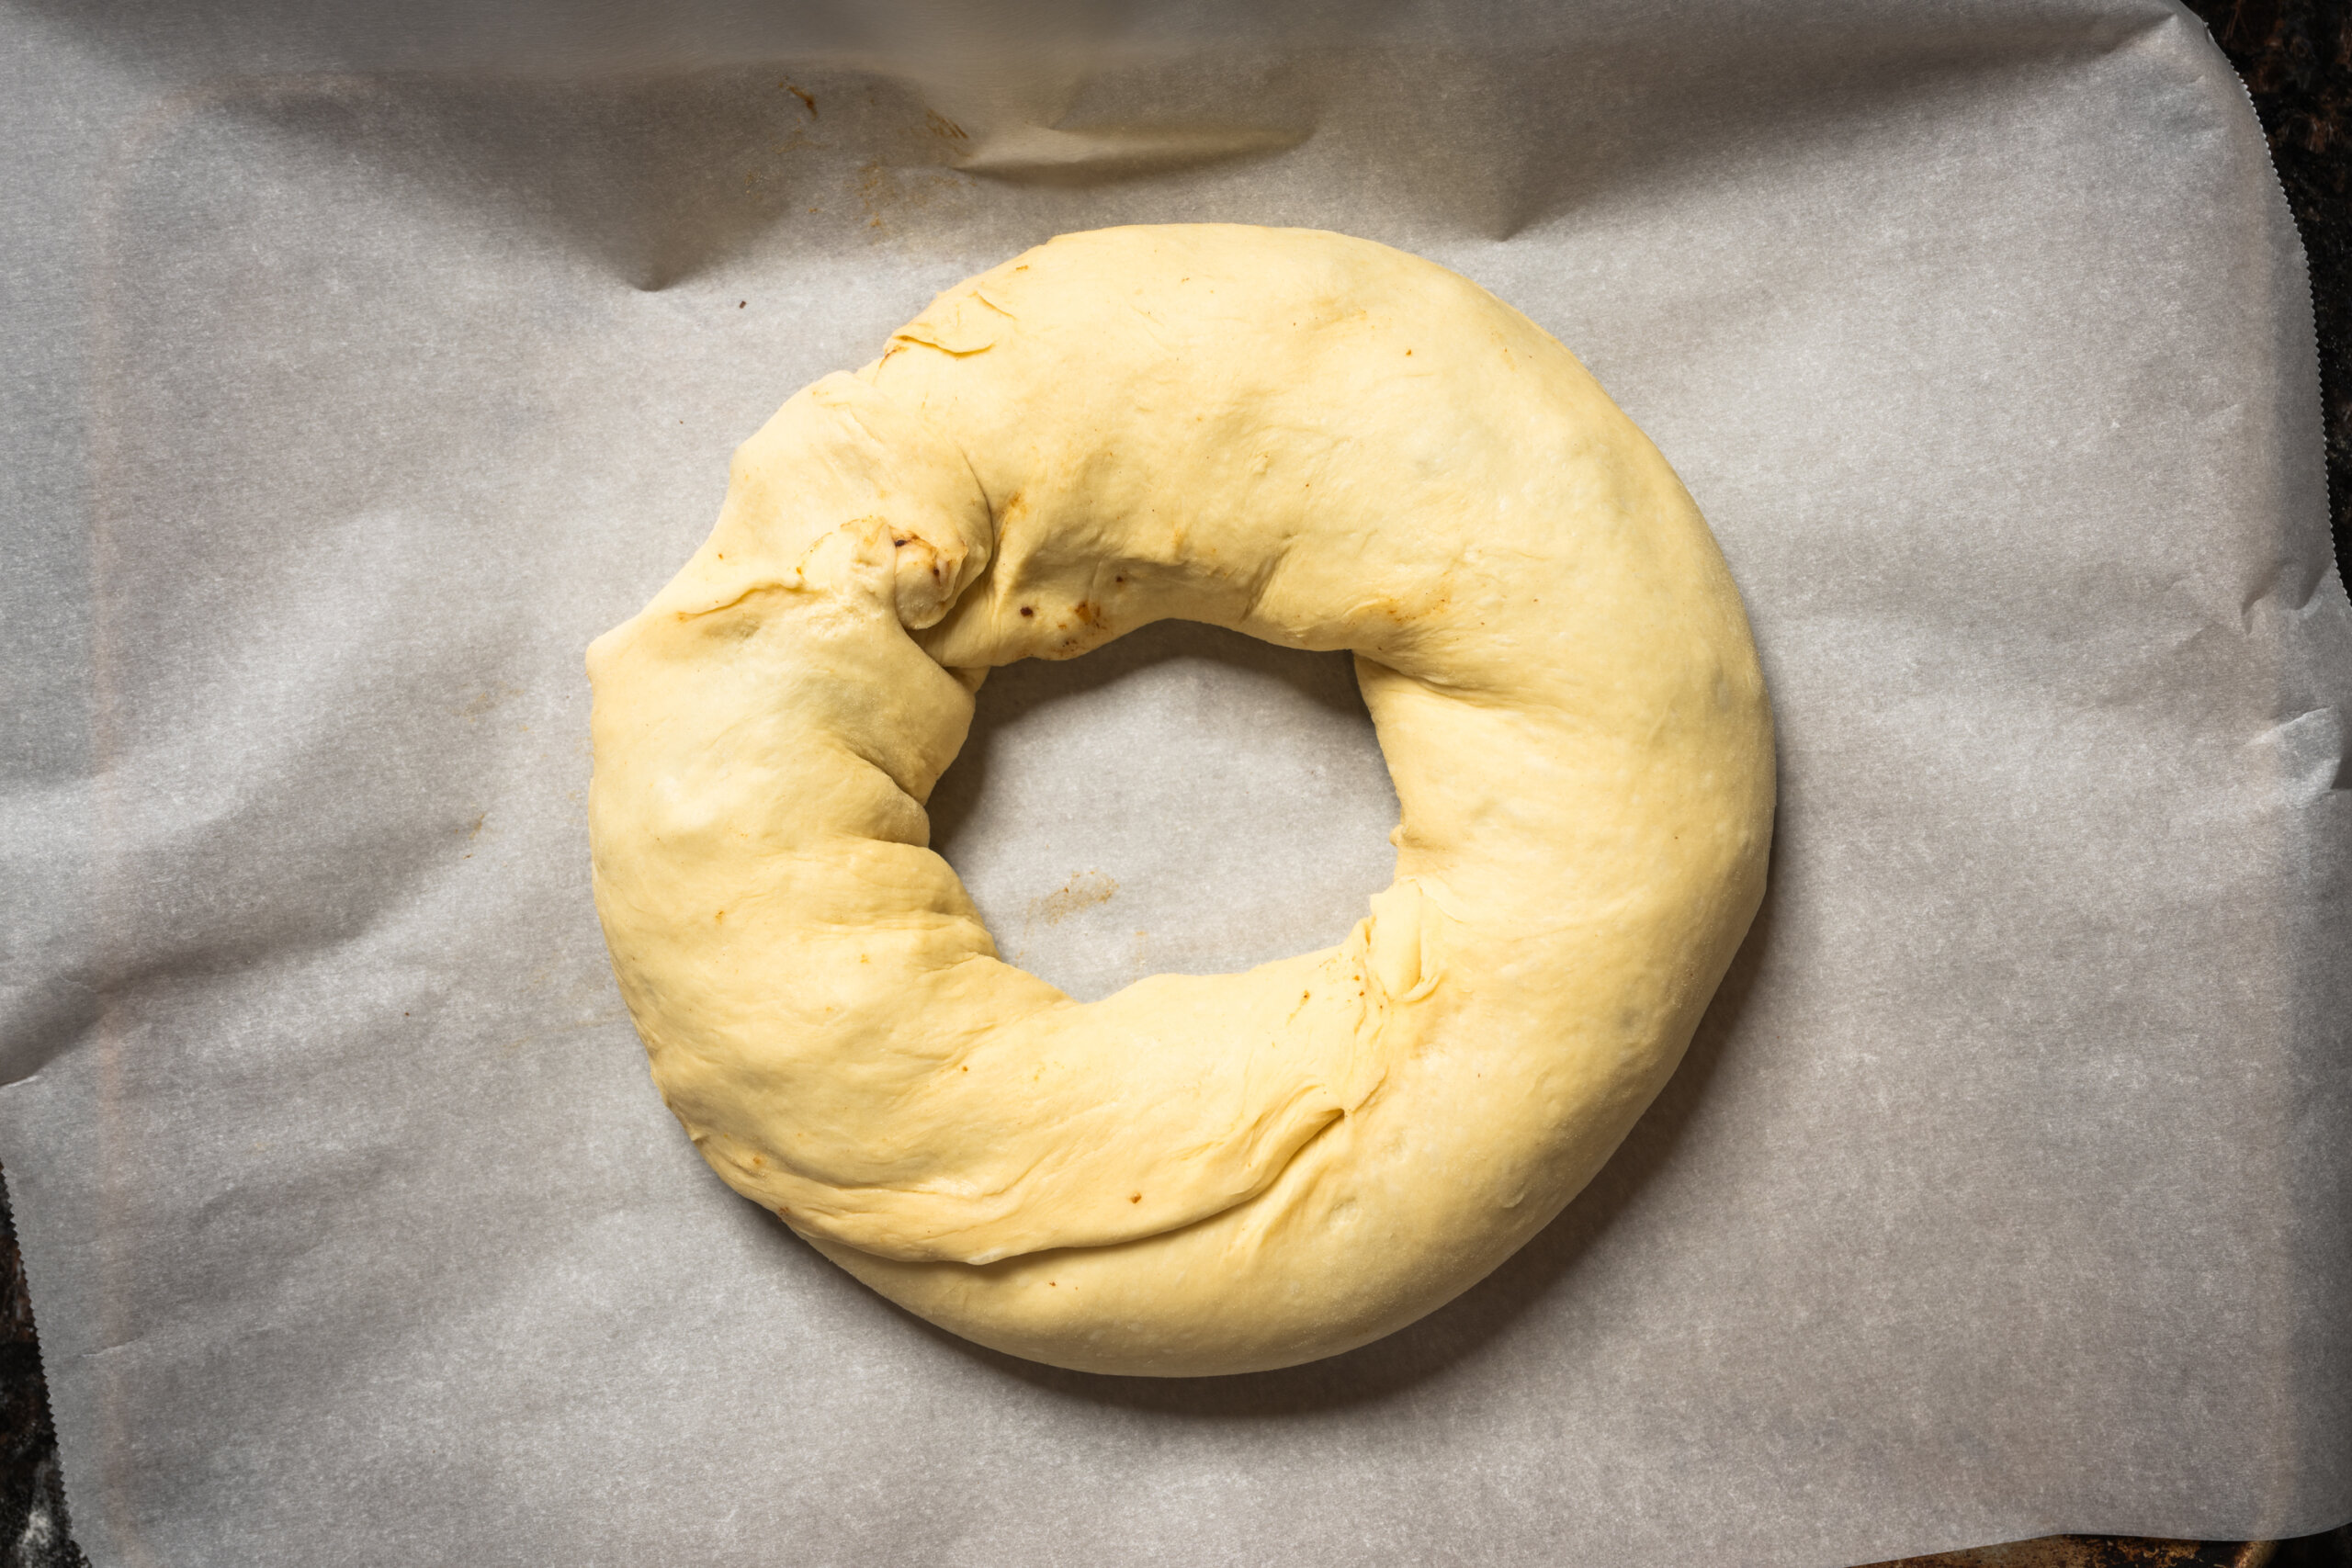 The filled king cake dough is rolled like a cinnamon roll and shaped in a large circle